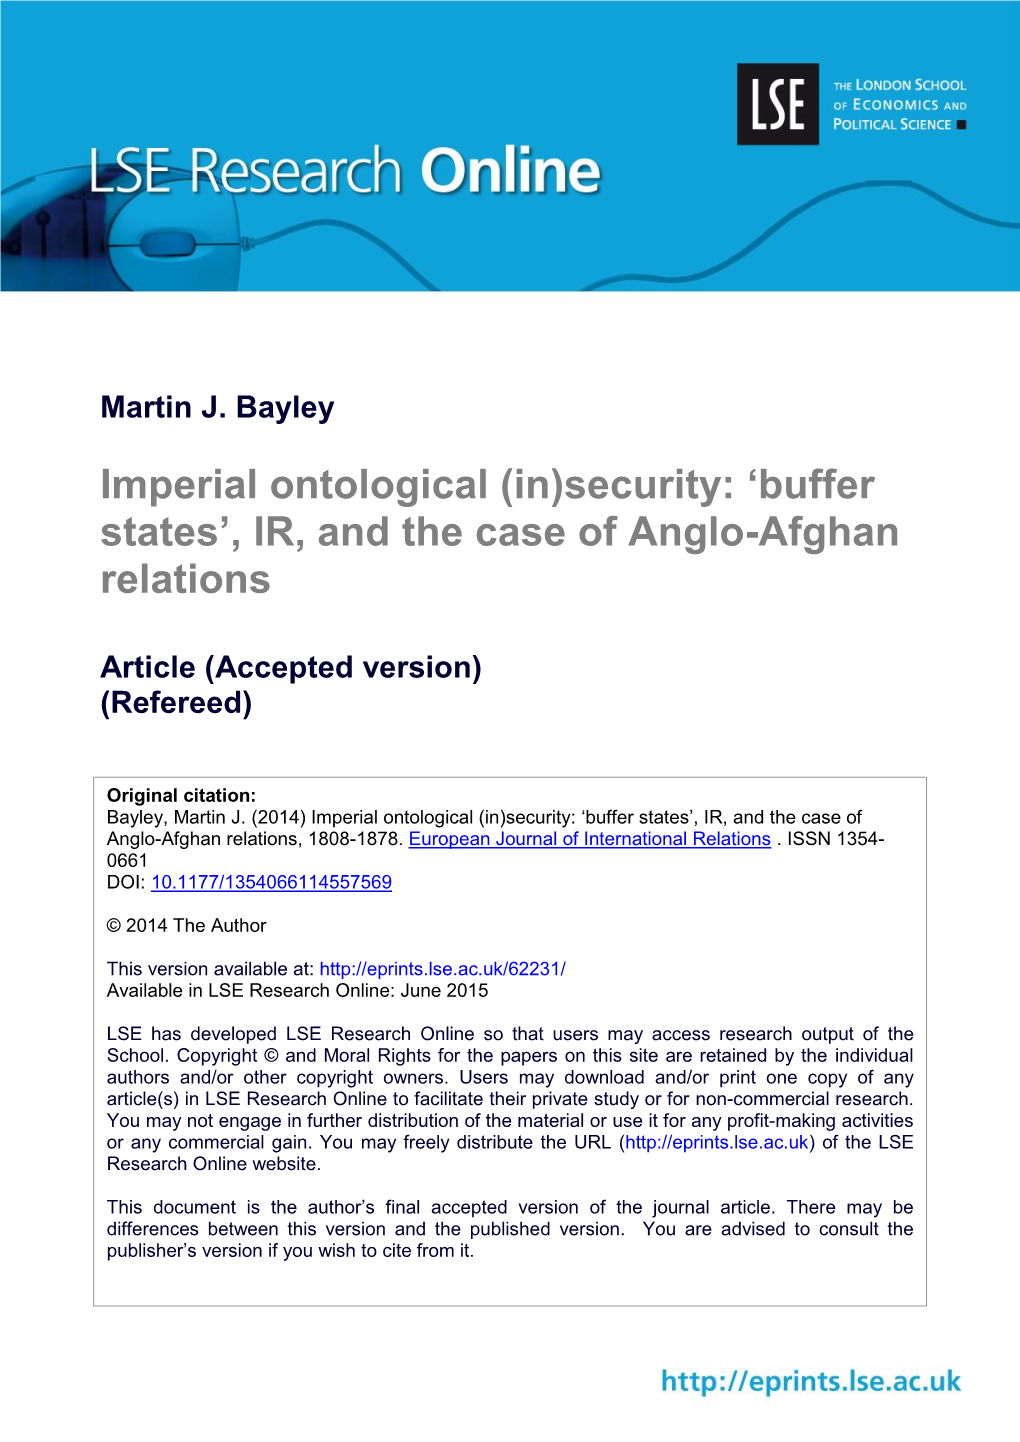 Imperial Ontological (In)Security: ‘Buffer States’, IR, and the Case of Anglo-Afghan Relations